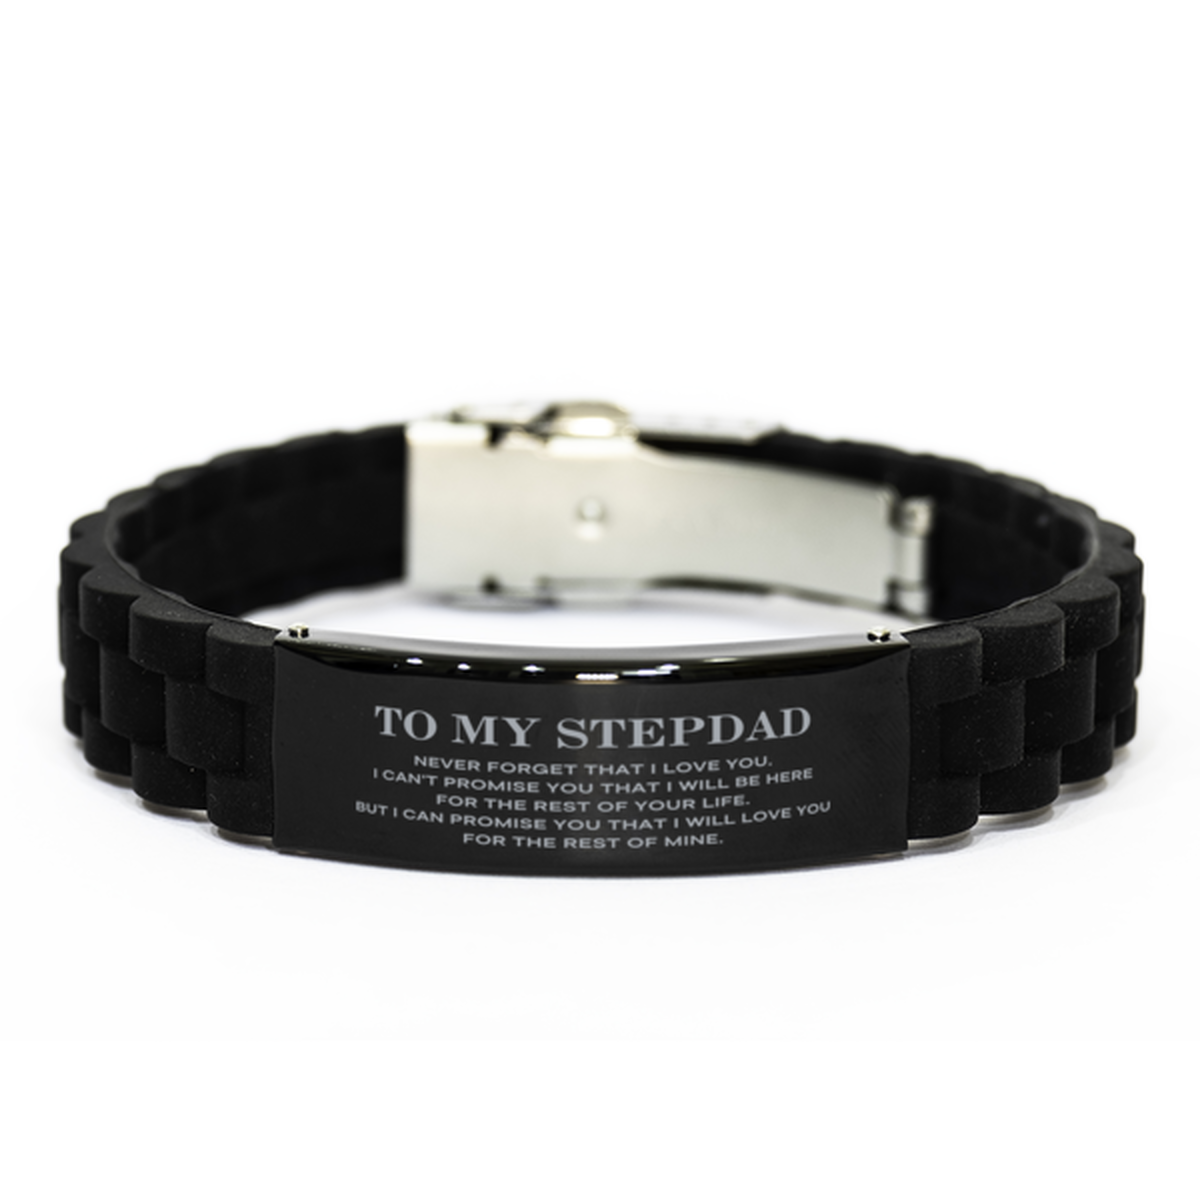 To My Stepdad Gifts, I will love you for the rest of mine, Love Stepdad Bracelet, Birthday Christmas Unique Black Glidelock Clasp Bracelet For Stepdad